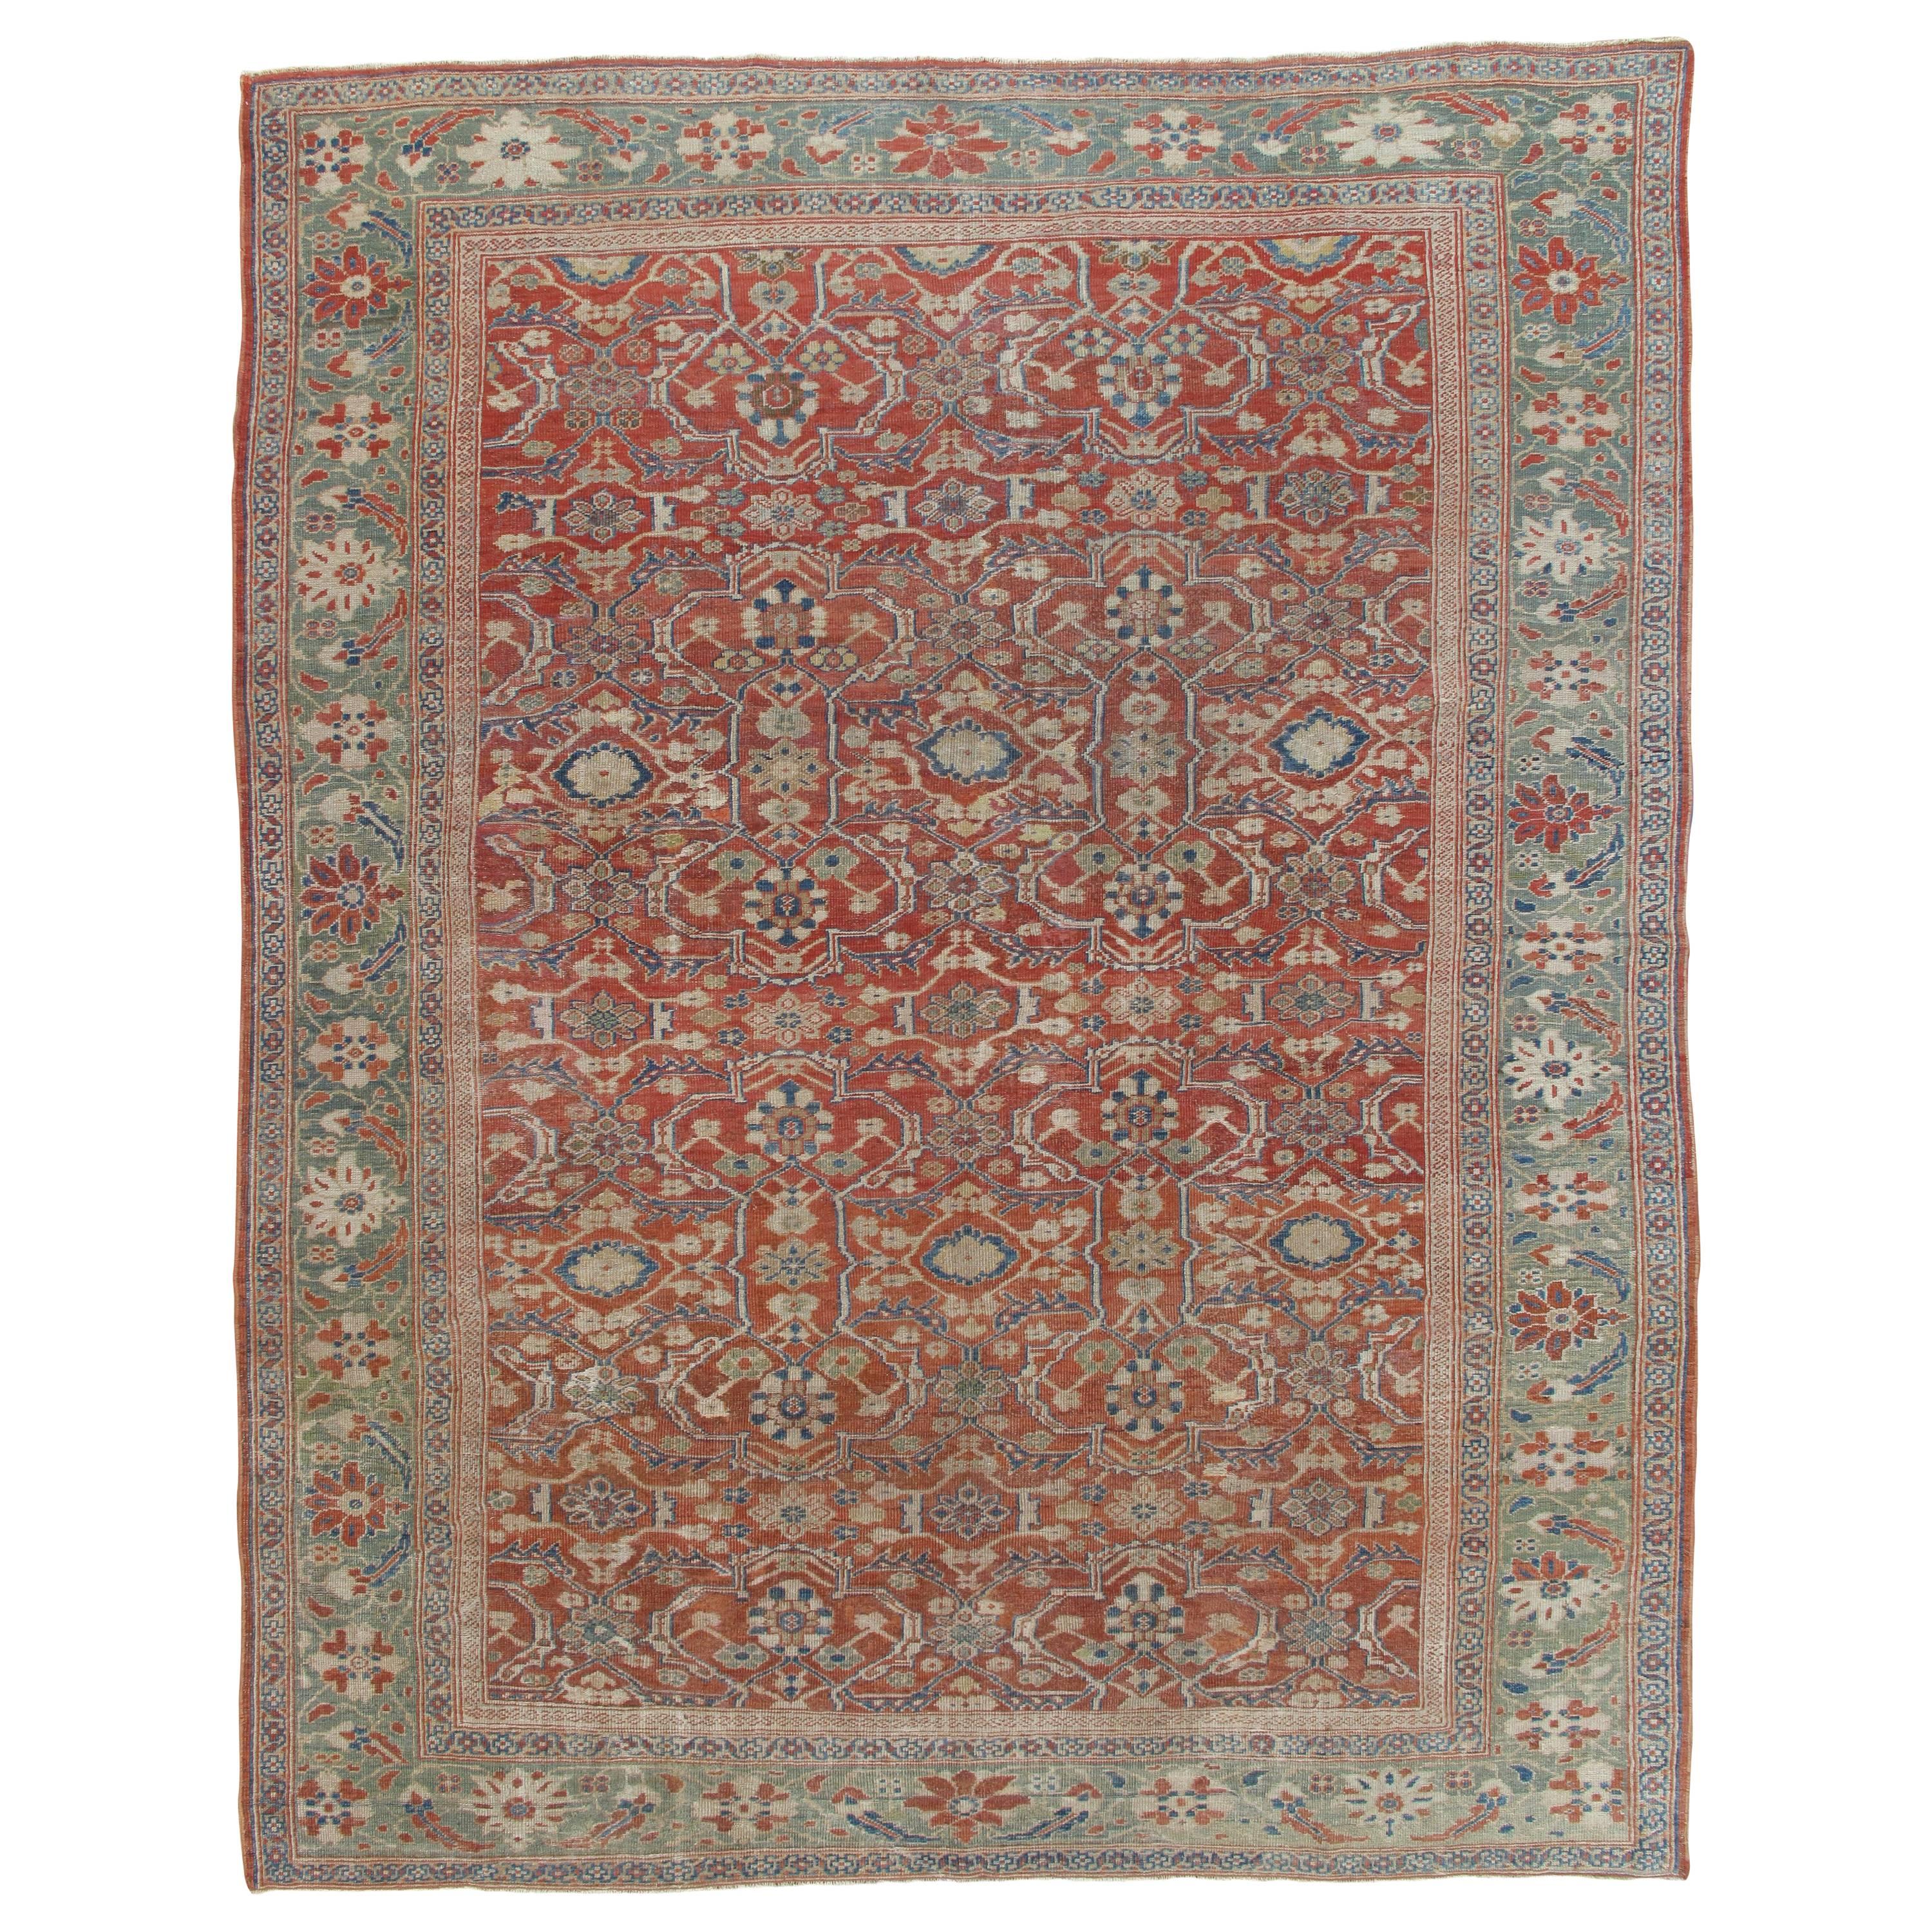 Antique Persian Sultanabad Carpet, Handmade Oriental Rug, Light Blue, Red, Green For Sale